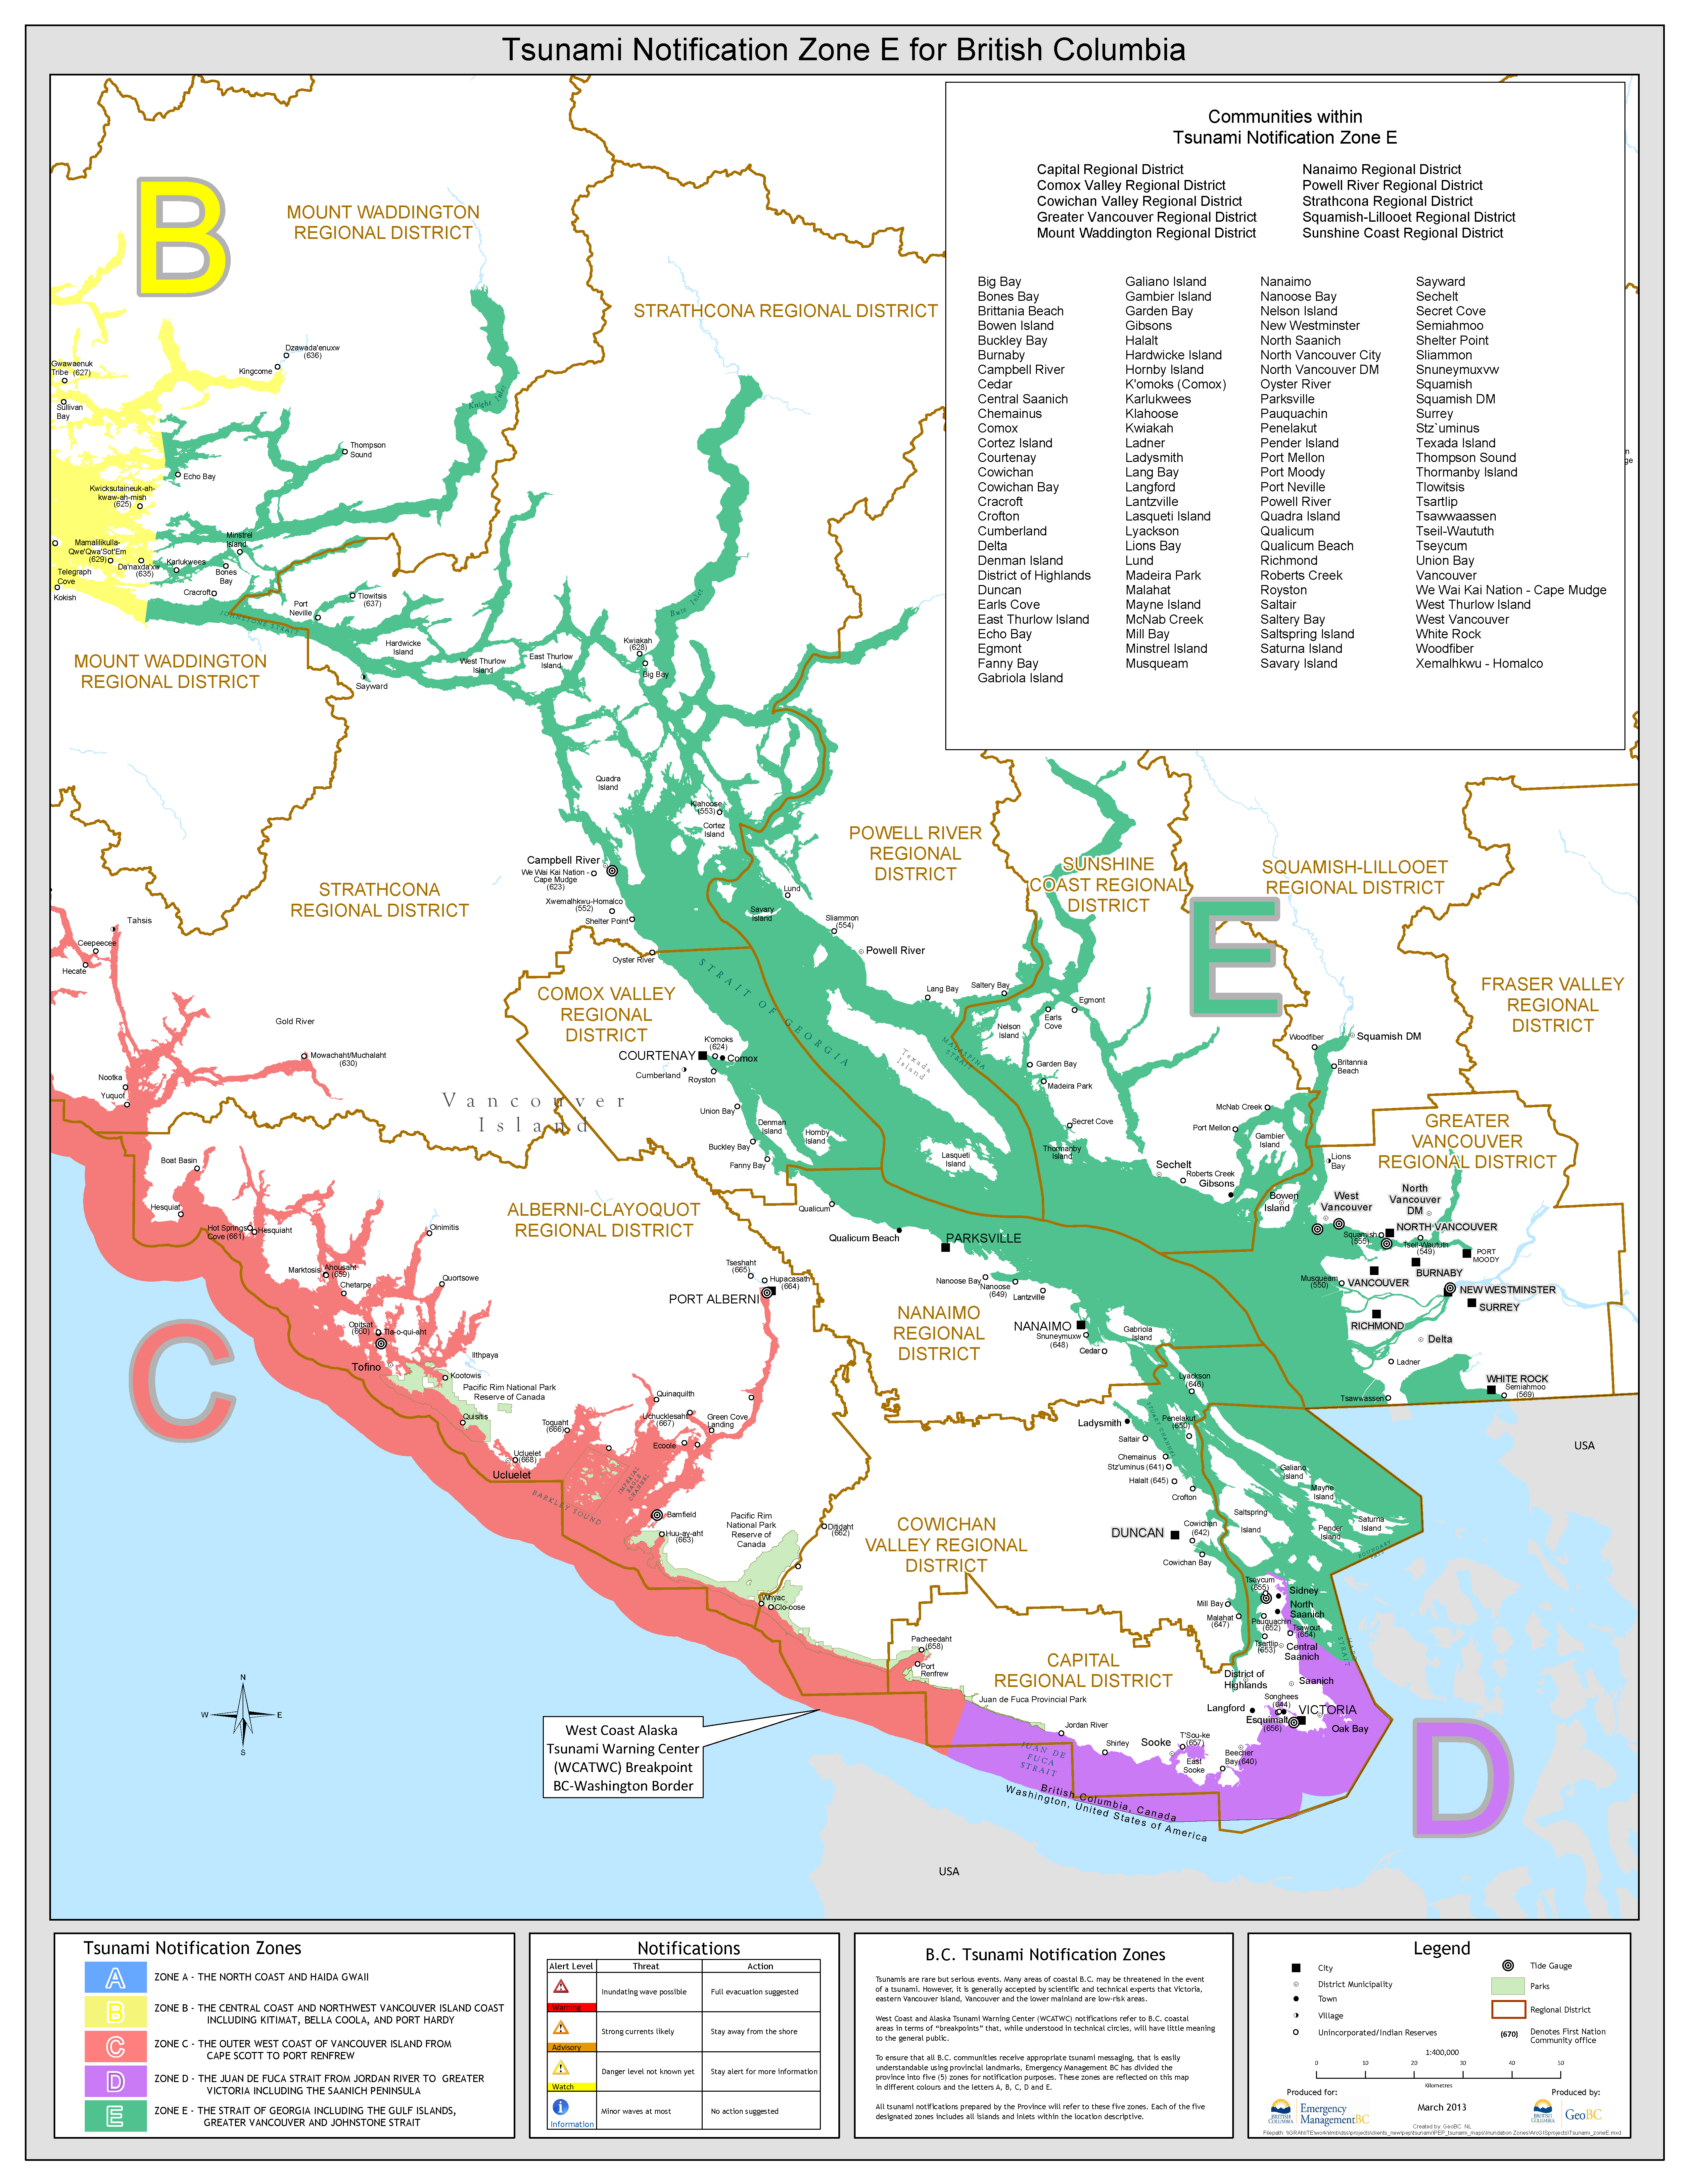 Highlighted map showing BC Tsunami Zone E. Zone E includes the Strait of Georgia including the Gulf Islands, Greater Vancouver and Johnstone Strait.